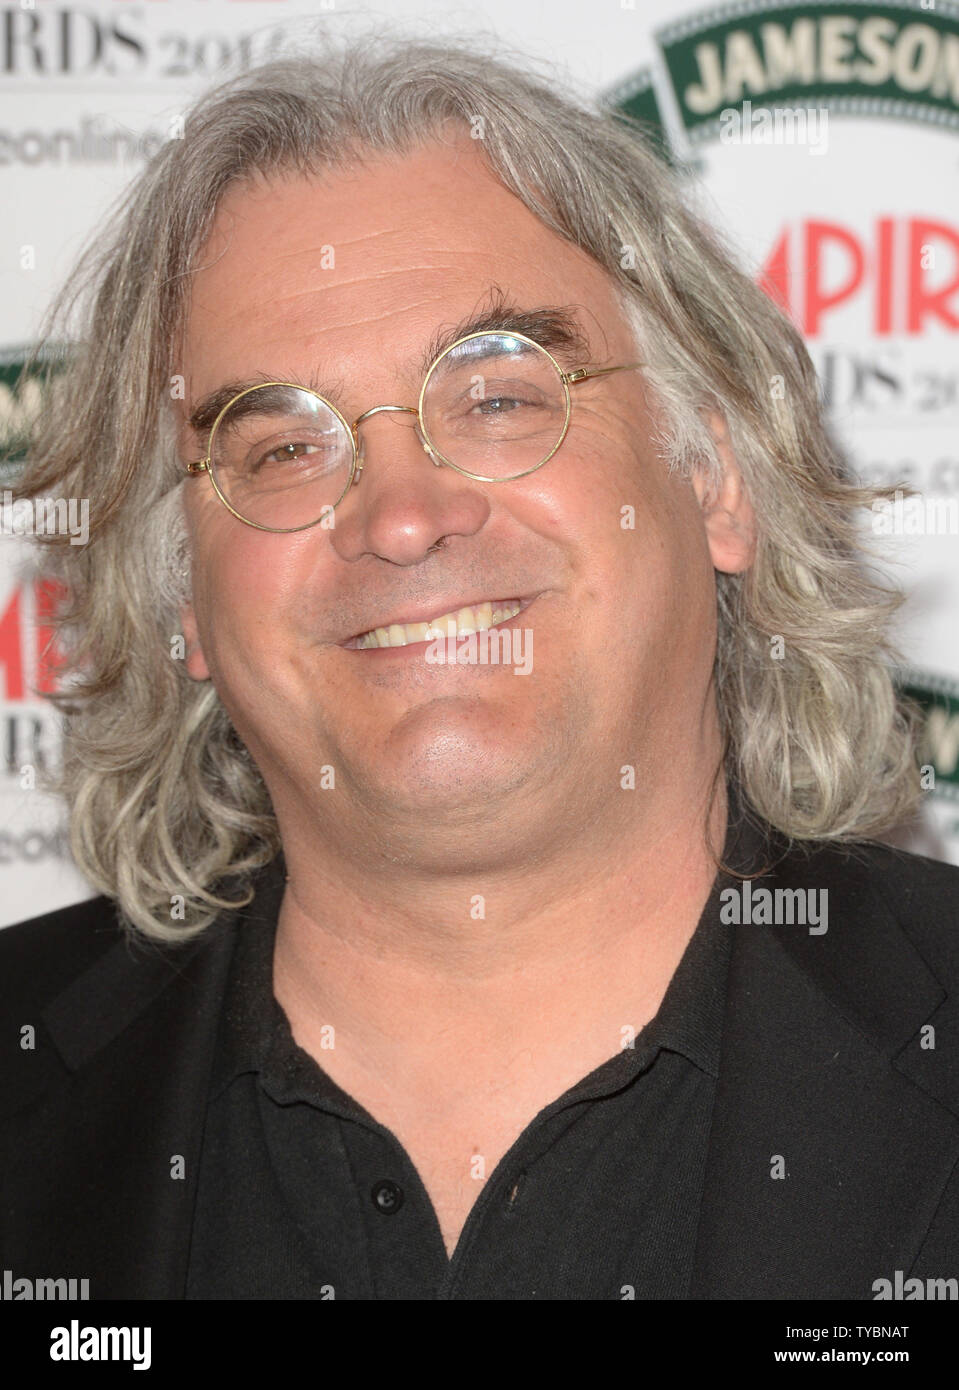 British Director Paul Greengrass Attends The Empire Awards At Grosvenor House In London On